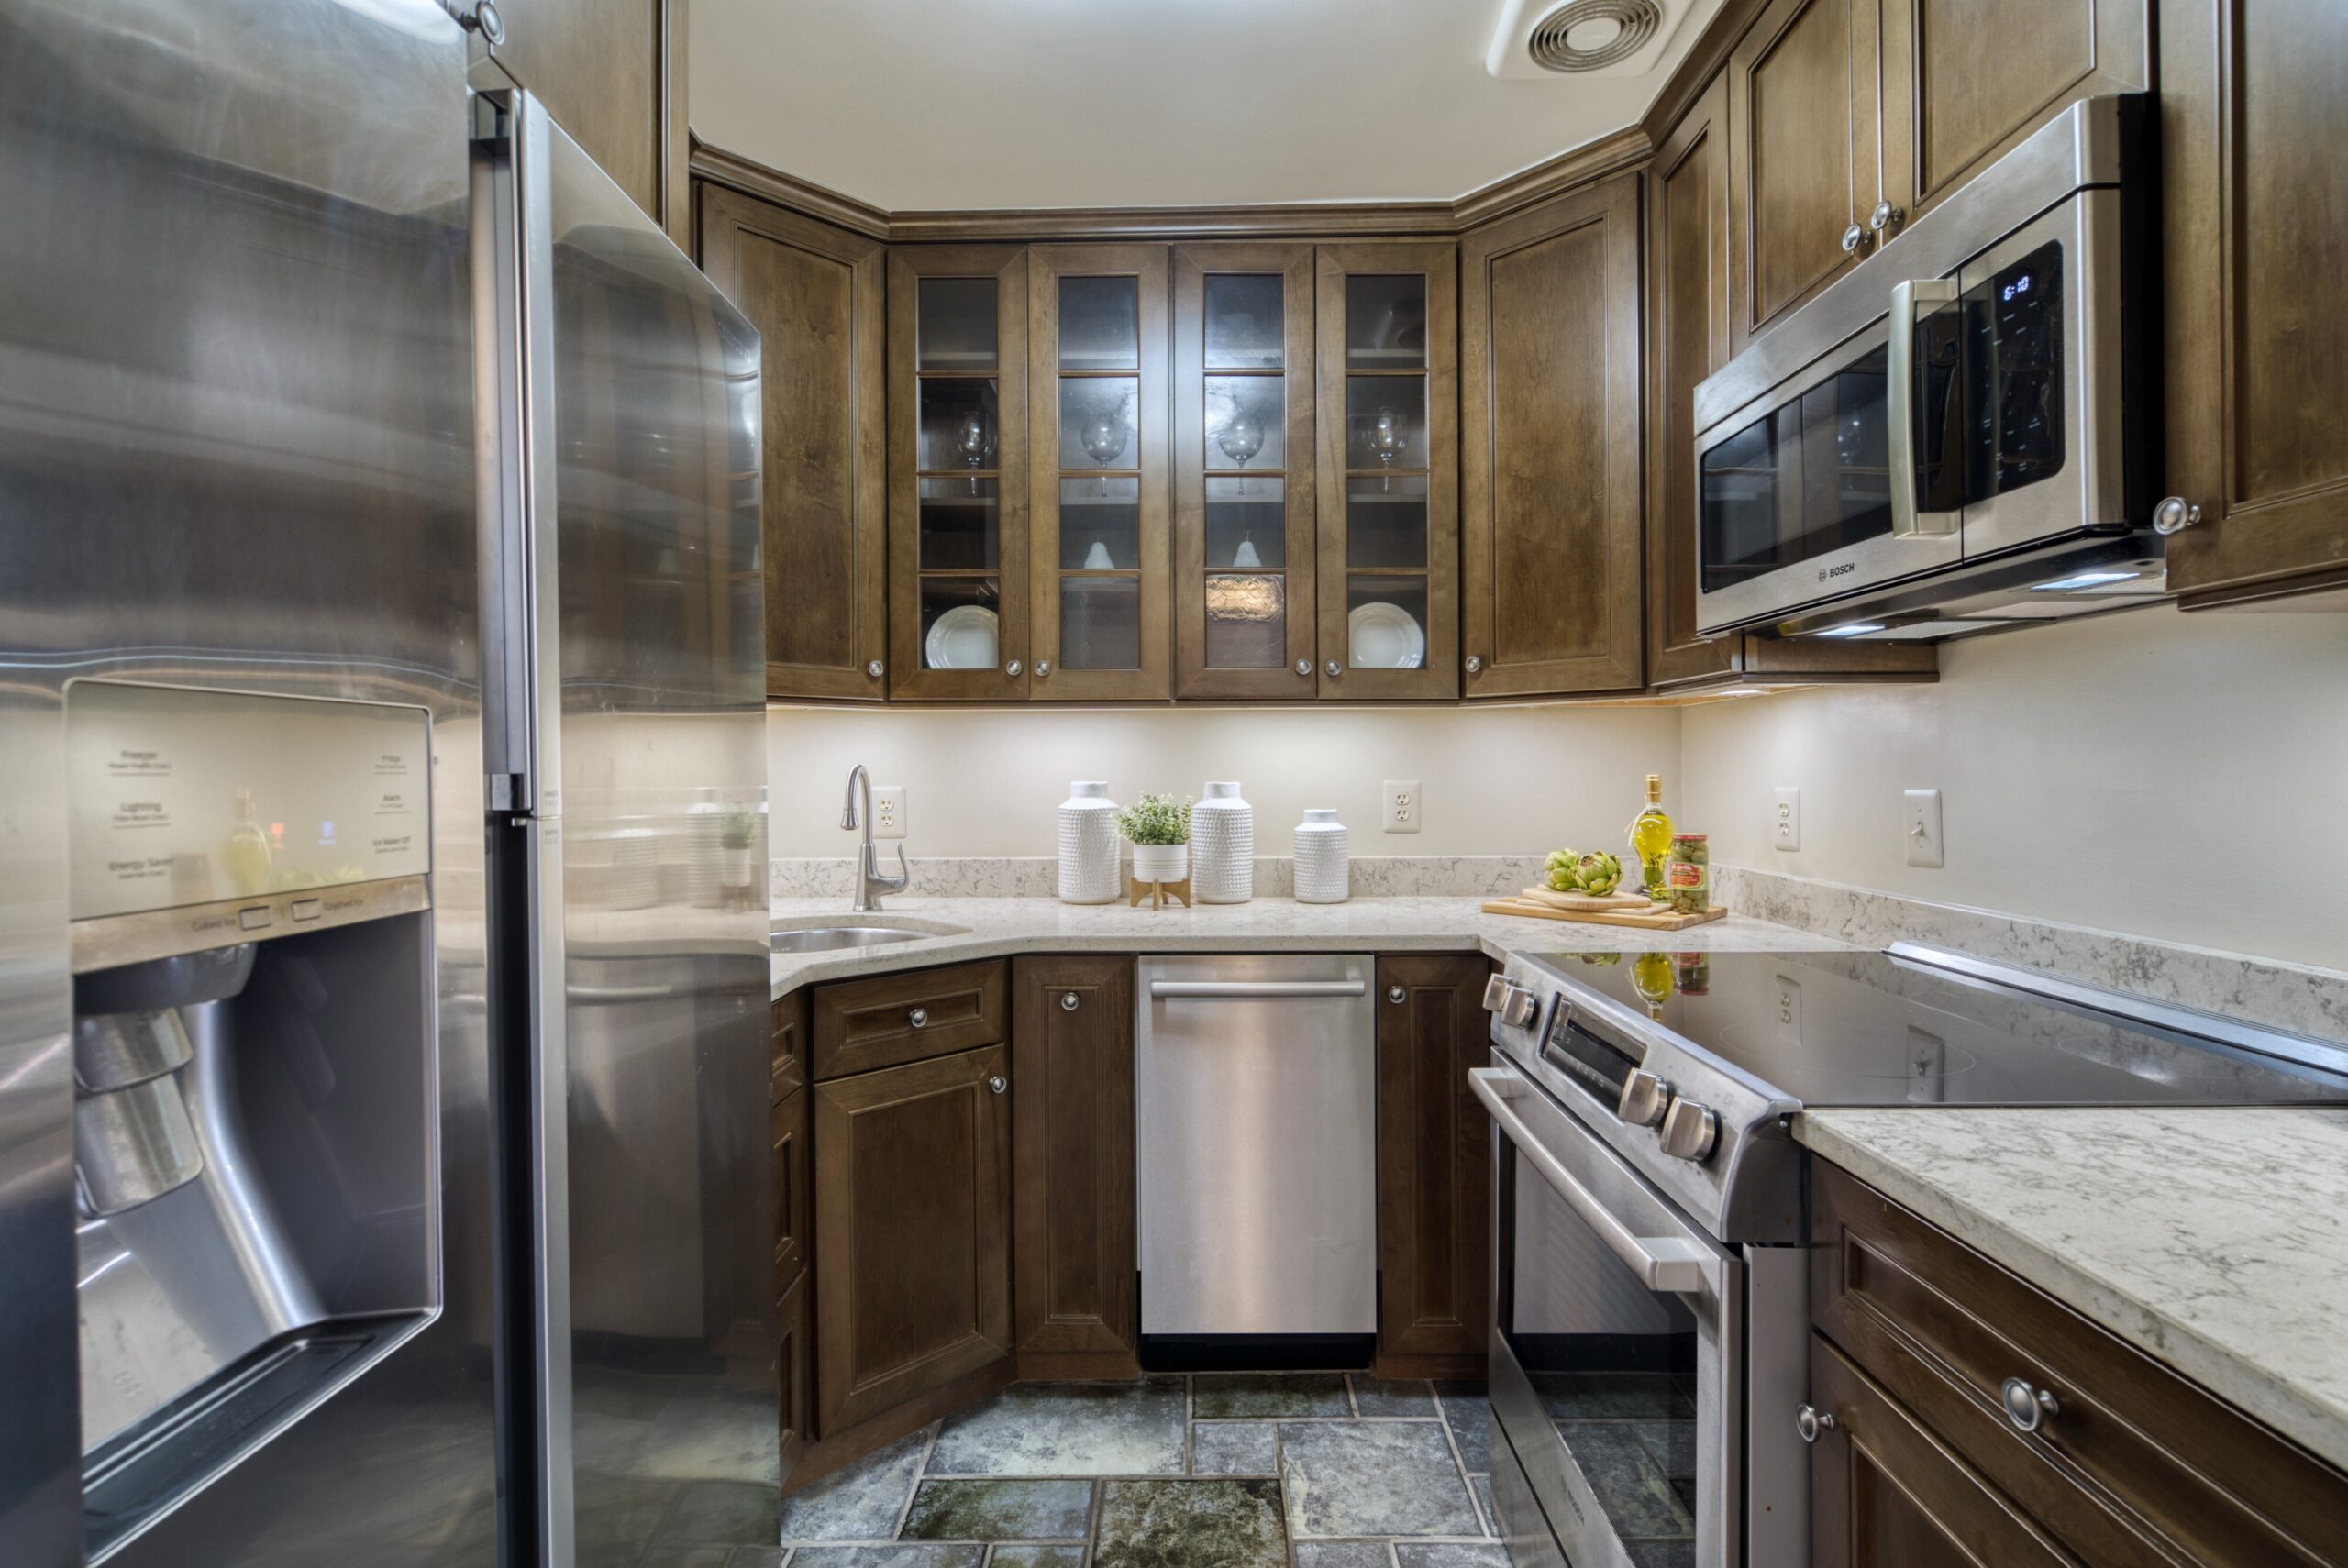 Professional interior photo of 125 N Lee St #401, Alexandria, VA - showing the kitchen with dark wood cabinets, stainless appliances, and granite counters